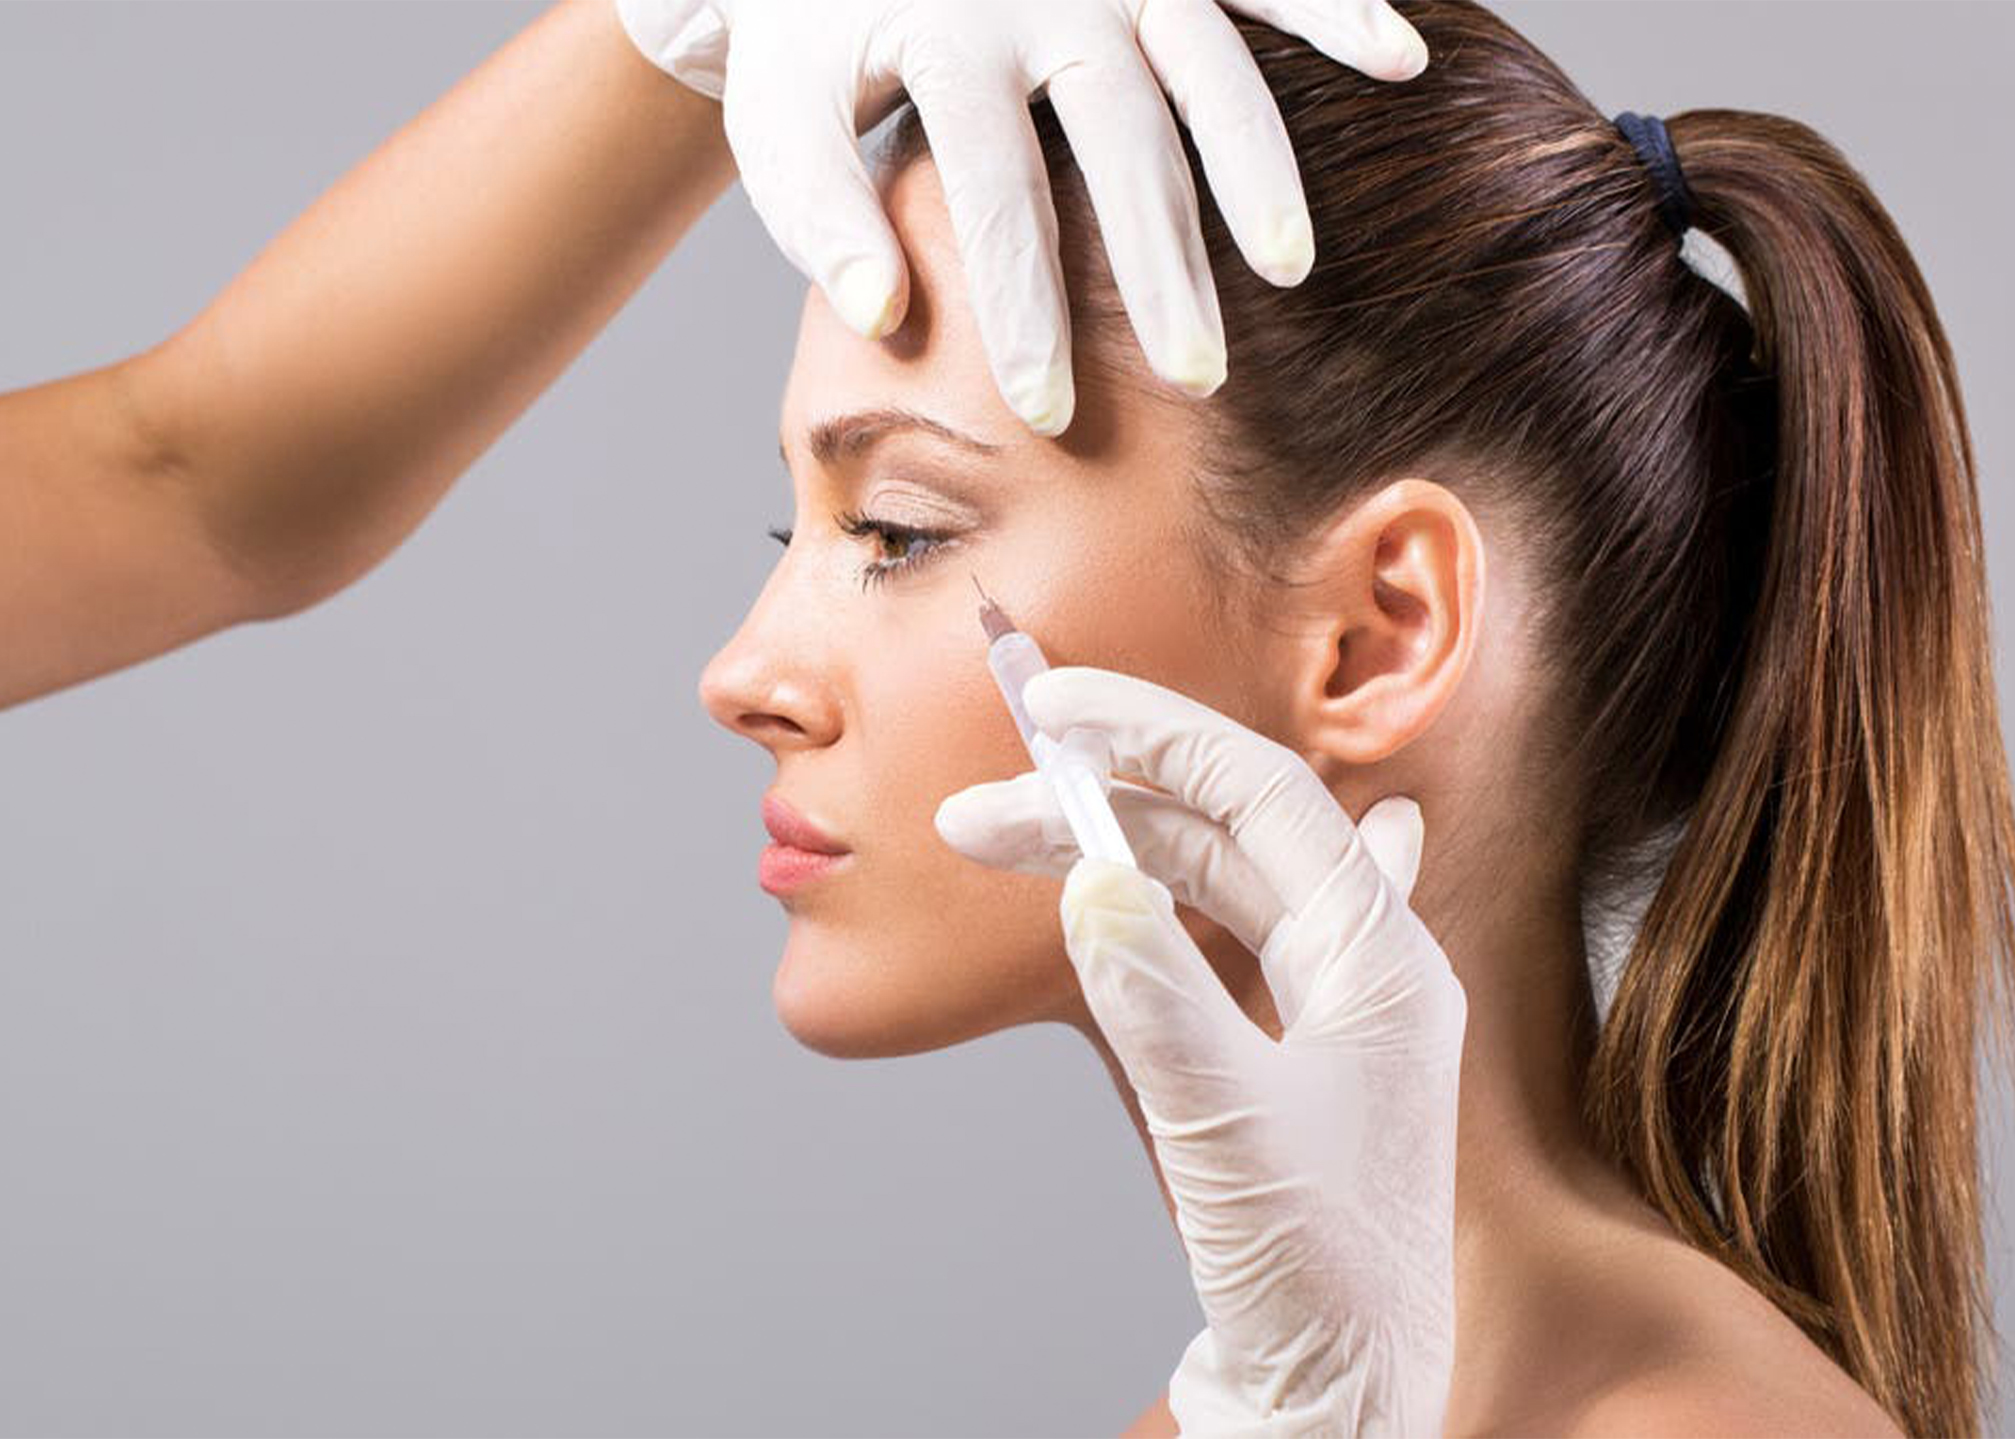 UAE doctors warn against ‘back-street’ fillers amid rise of botched cosmetic surgery